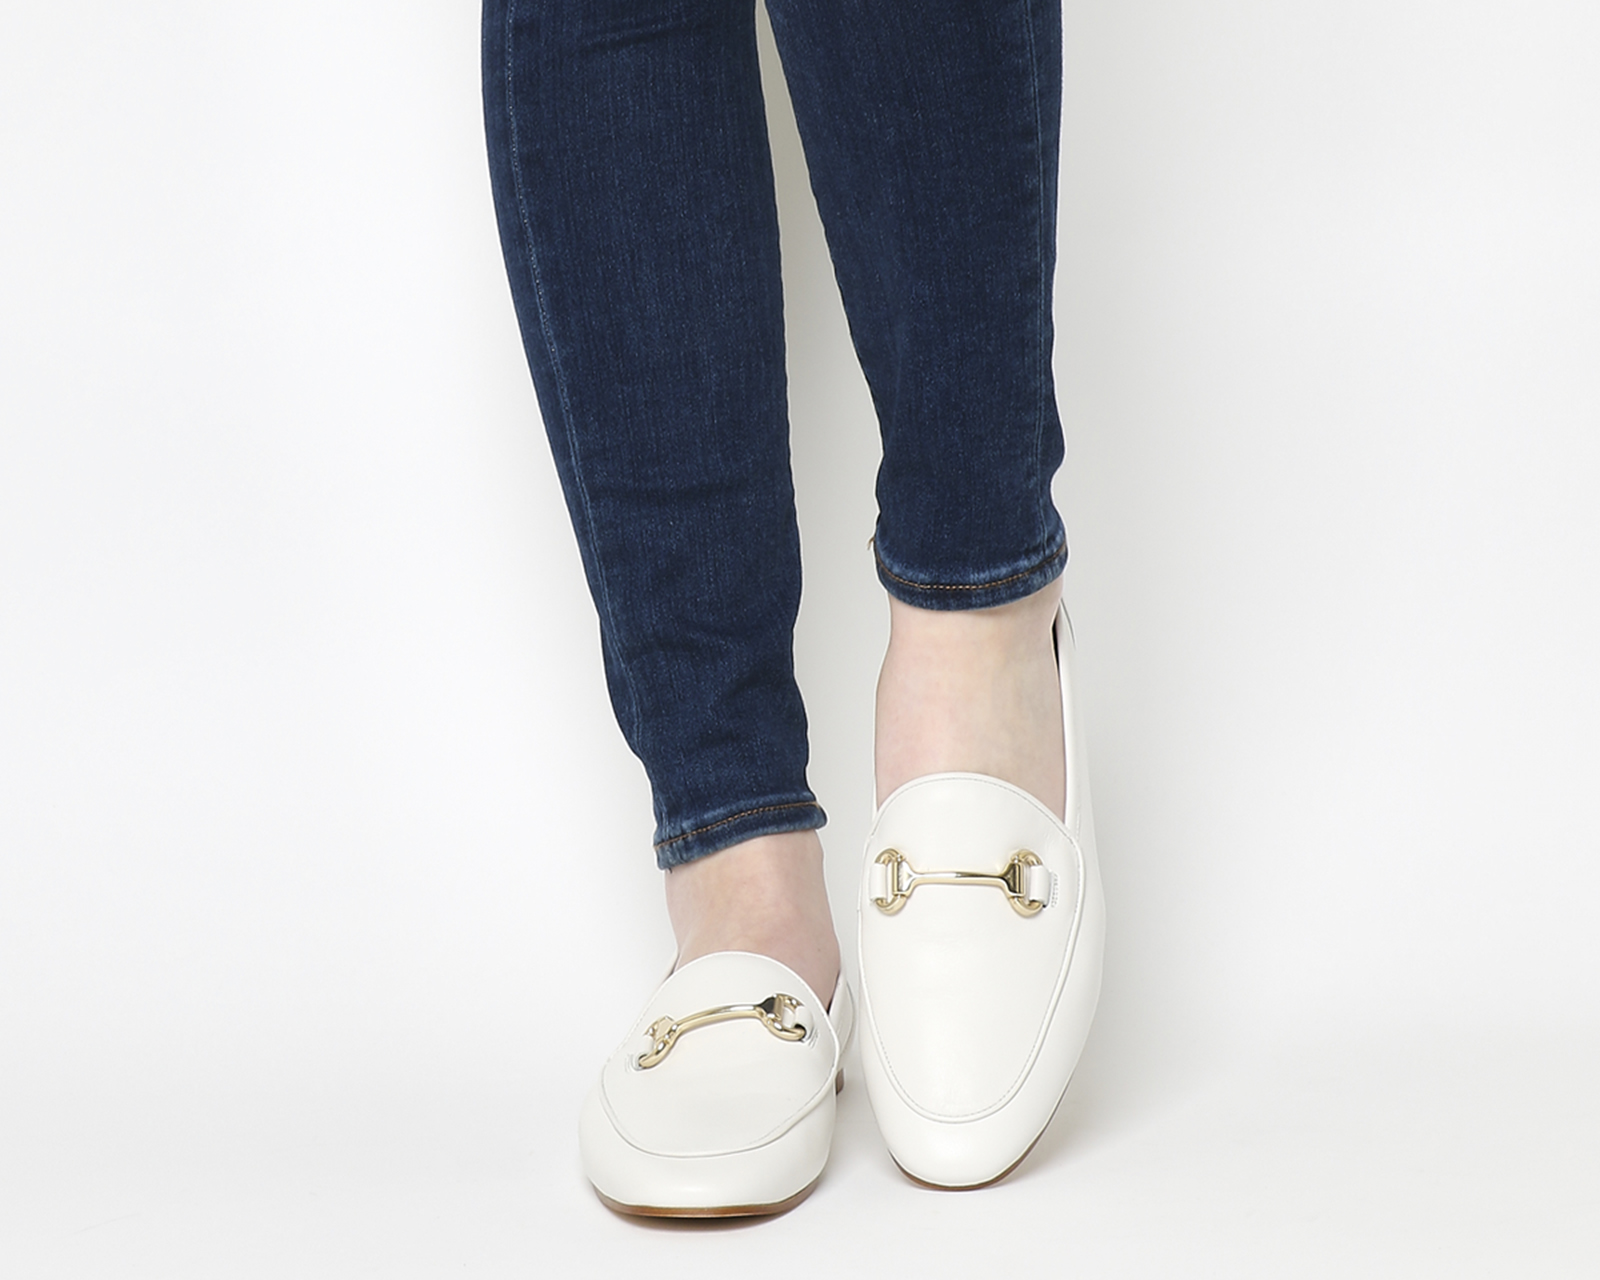 OFFICEDapper Trim LoafersOff White Leather